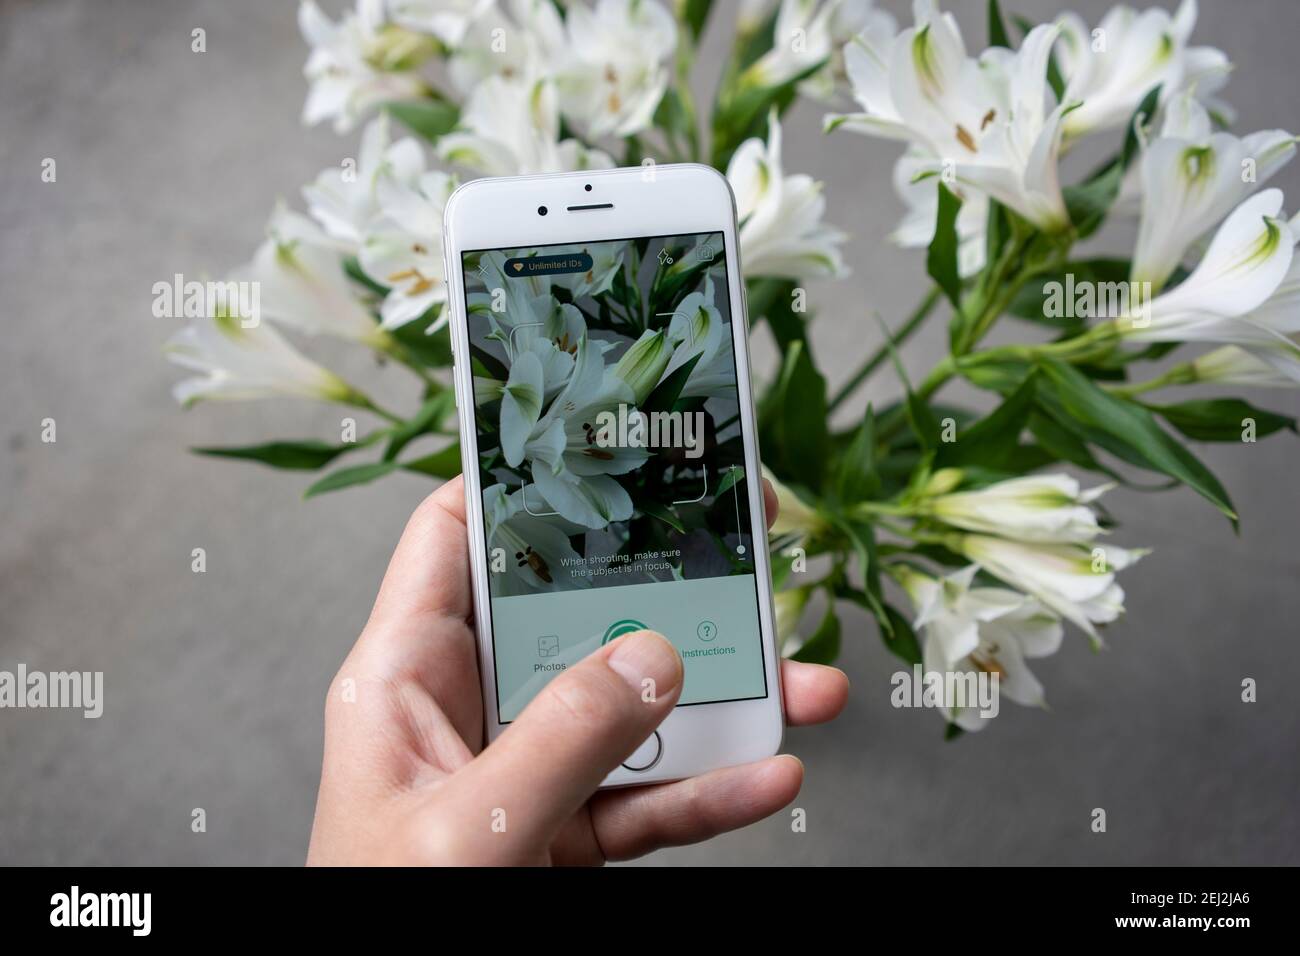 An anthophile tests the PictureThis app on an iPhone to identify a flower. The flower in the picture is Peruvian lily (lily of the Incas). Stock Photo